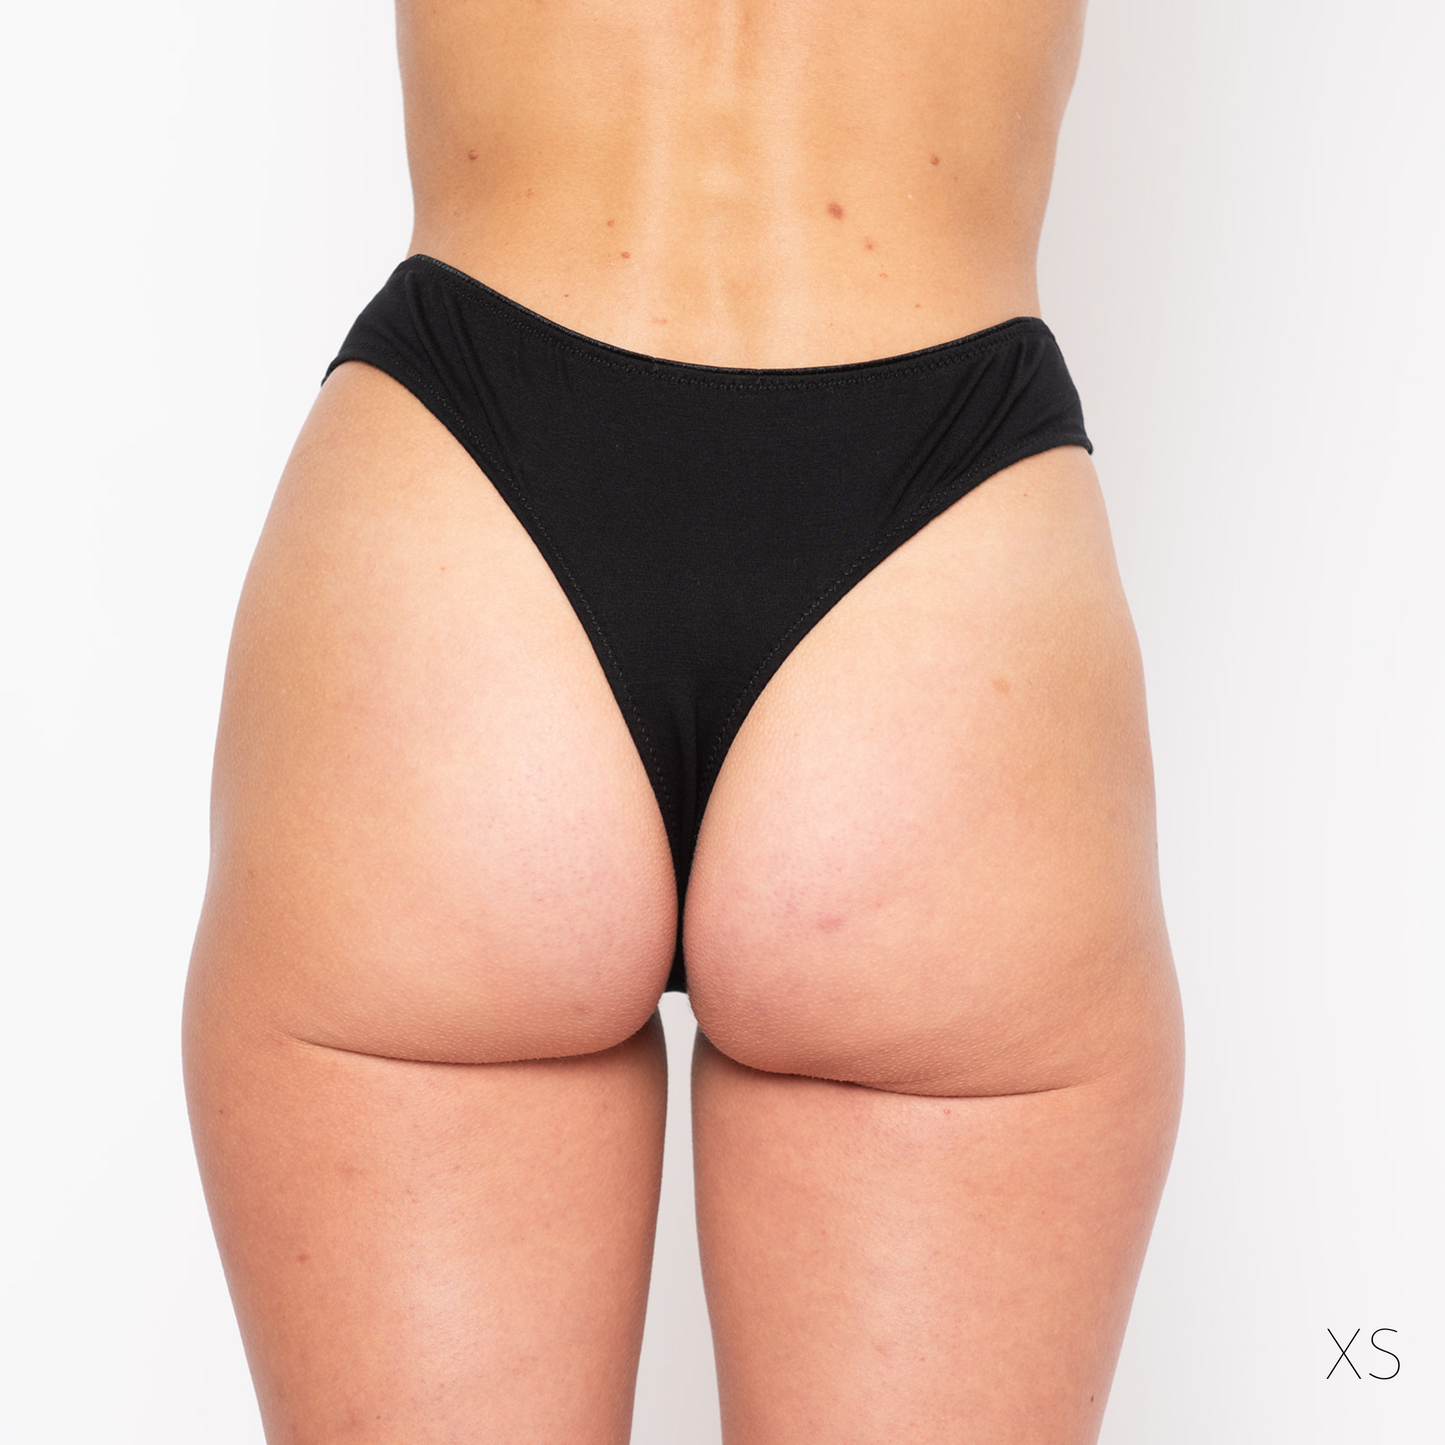 String underwear. Oxygen Collection. Nice fit, comfortable and healthy for your most precious parts. Lore Janssens Oh Yaz Black String Oxygen Collection breathable underwear comfortable black string thong healthy underwear cotton ecovero vaginal irritation ohyaz 3XL 4XL 5XL